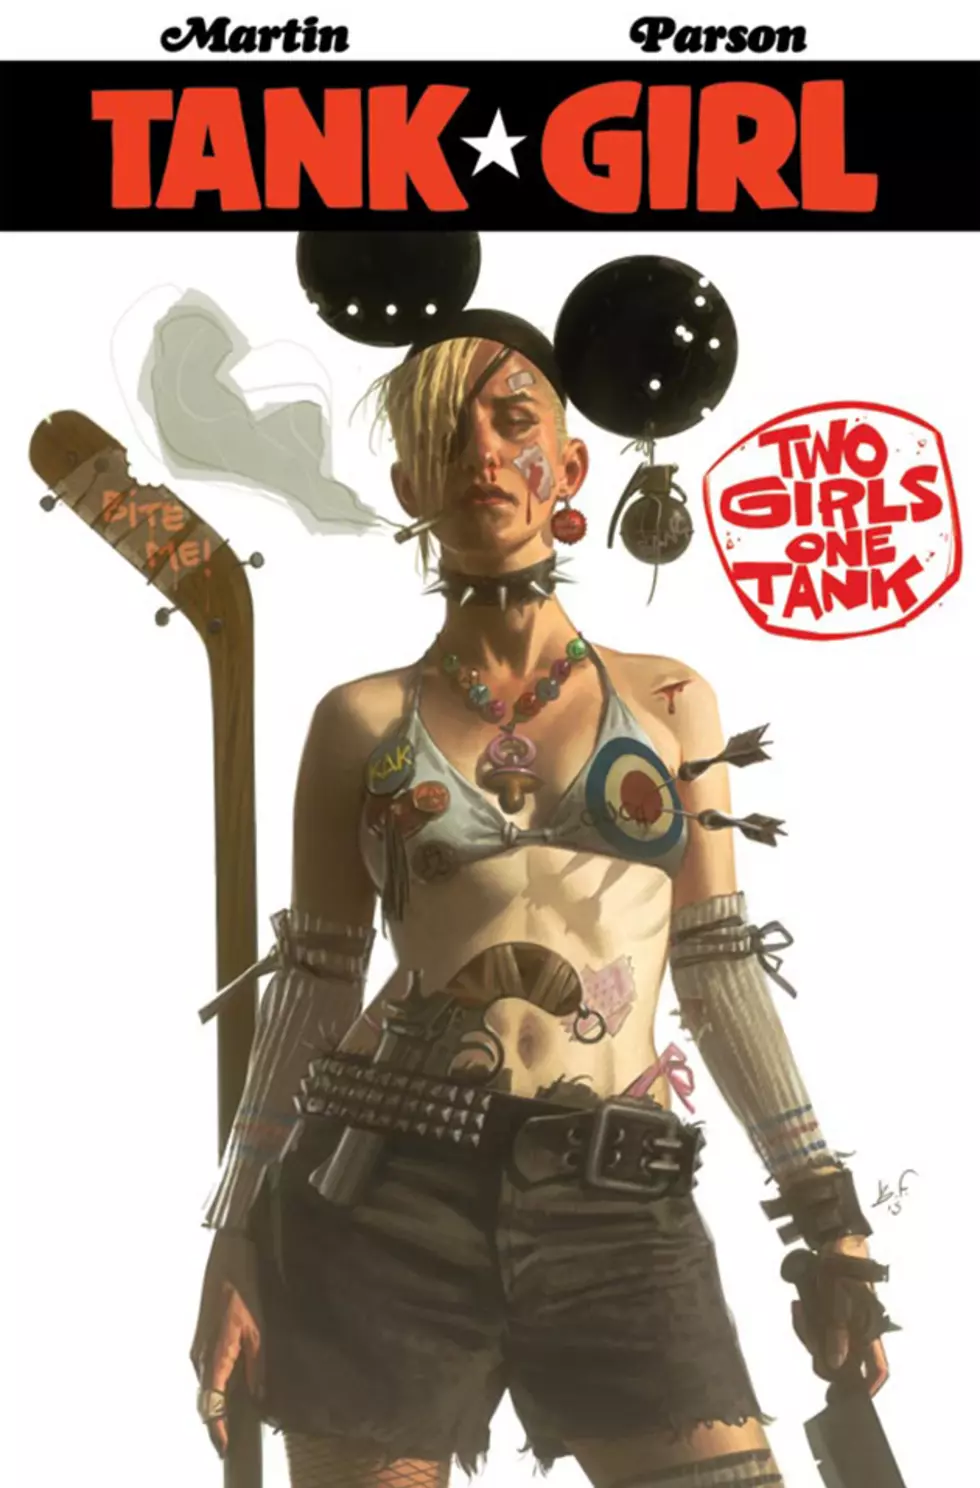 Tank Girl' Returns In May With 'Two Girls, One Tank'